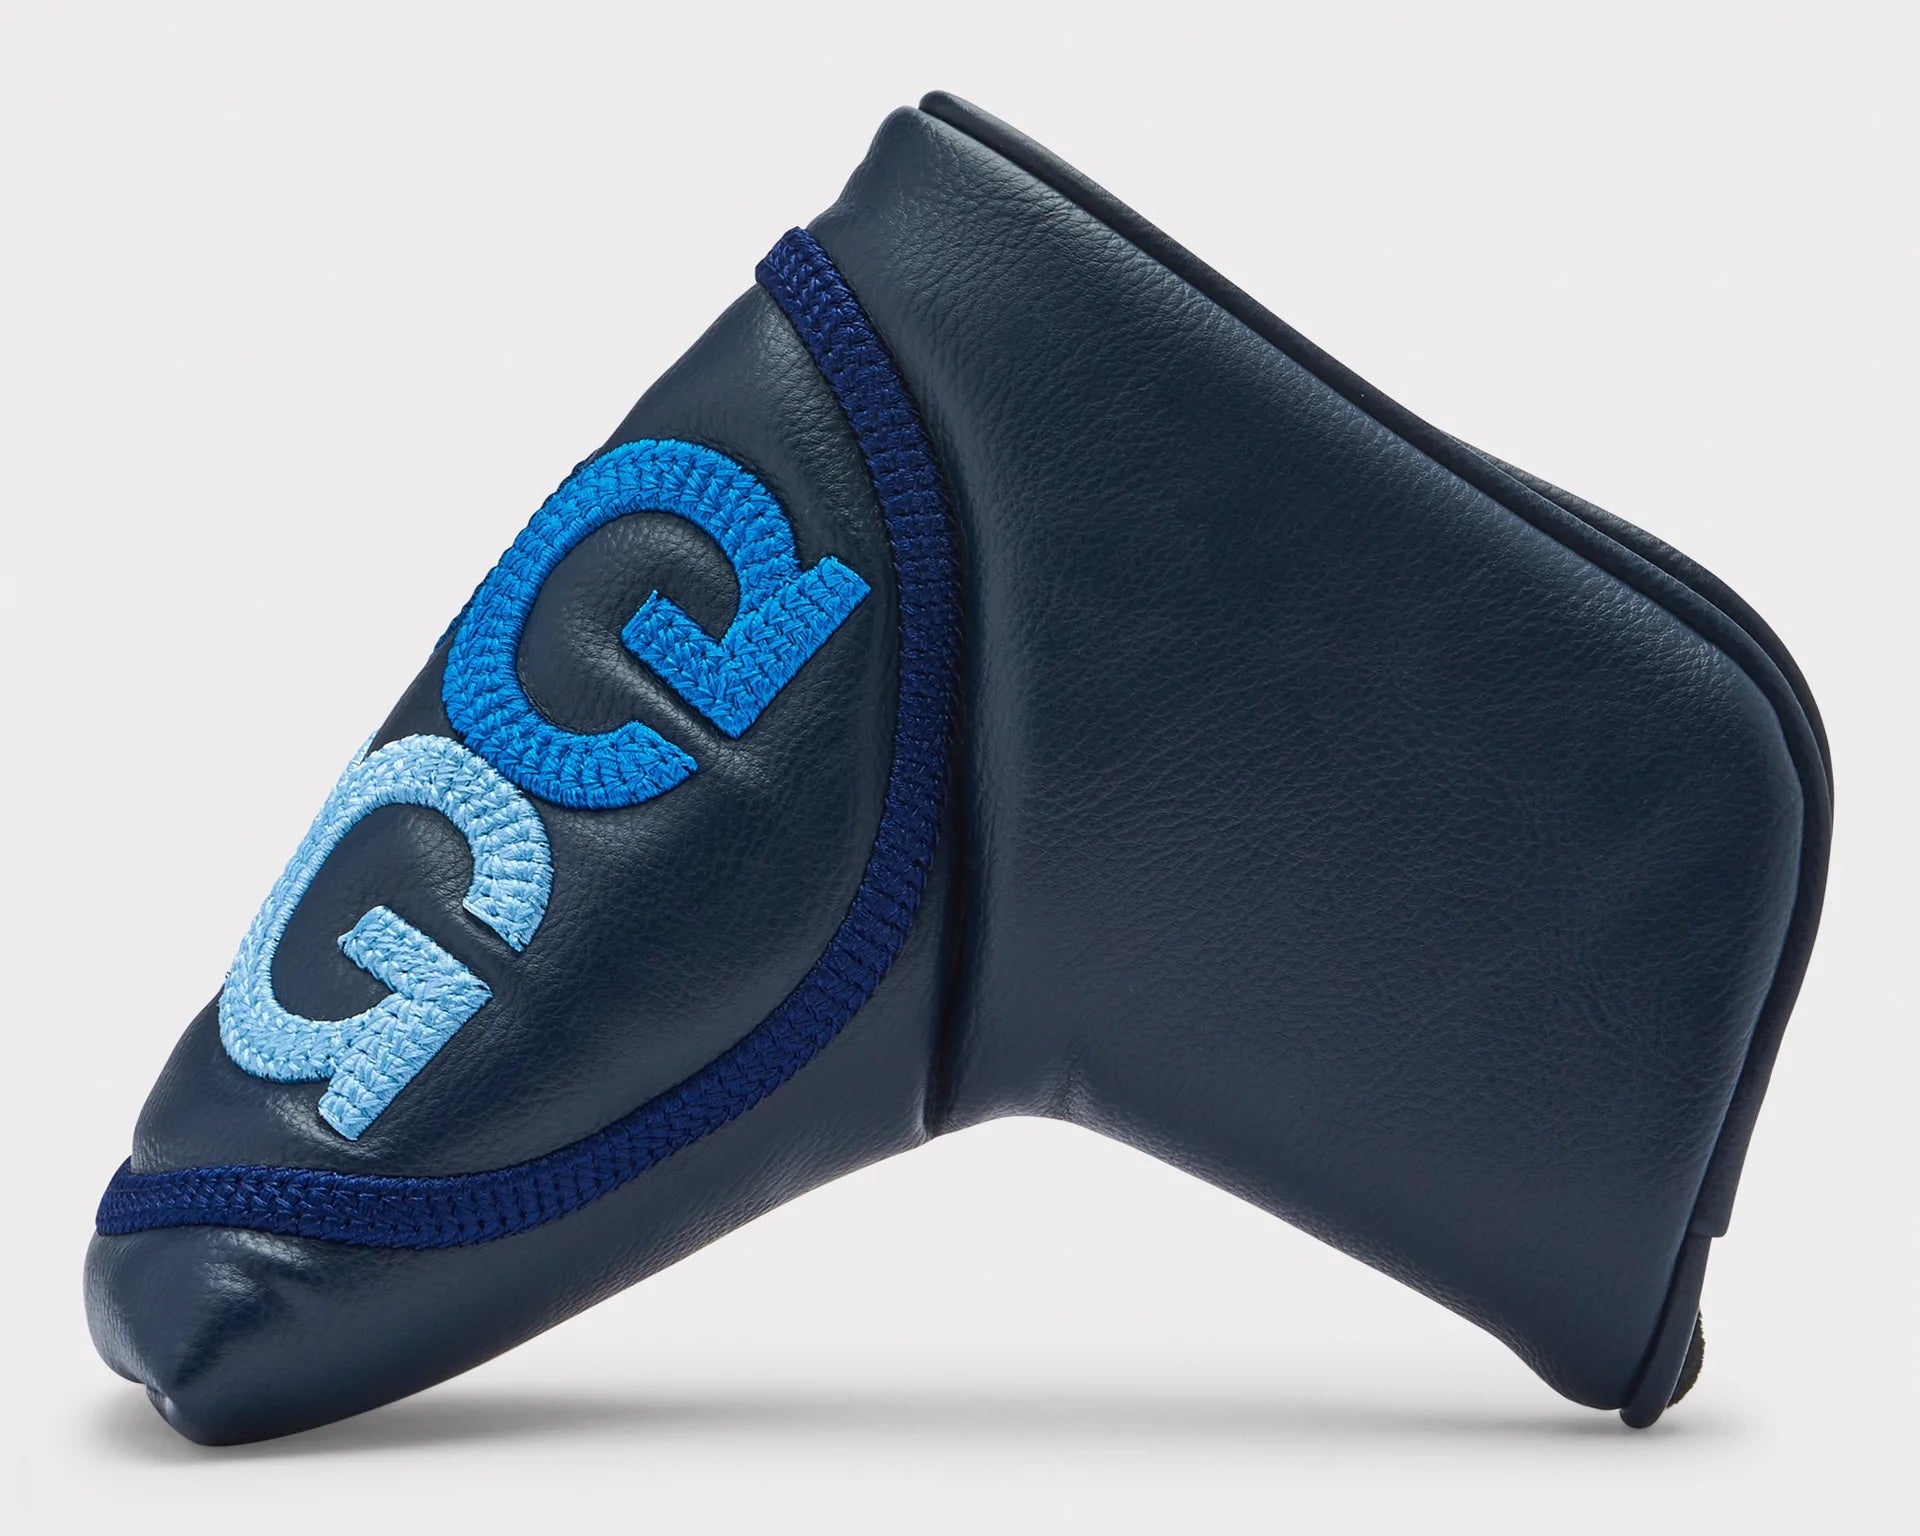 G/FORE CIRCLE G'S BLADE PUTTER HEADCOVER